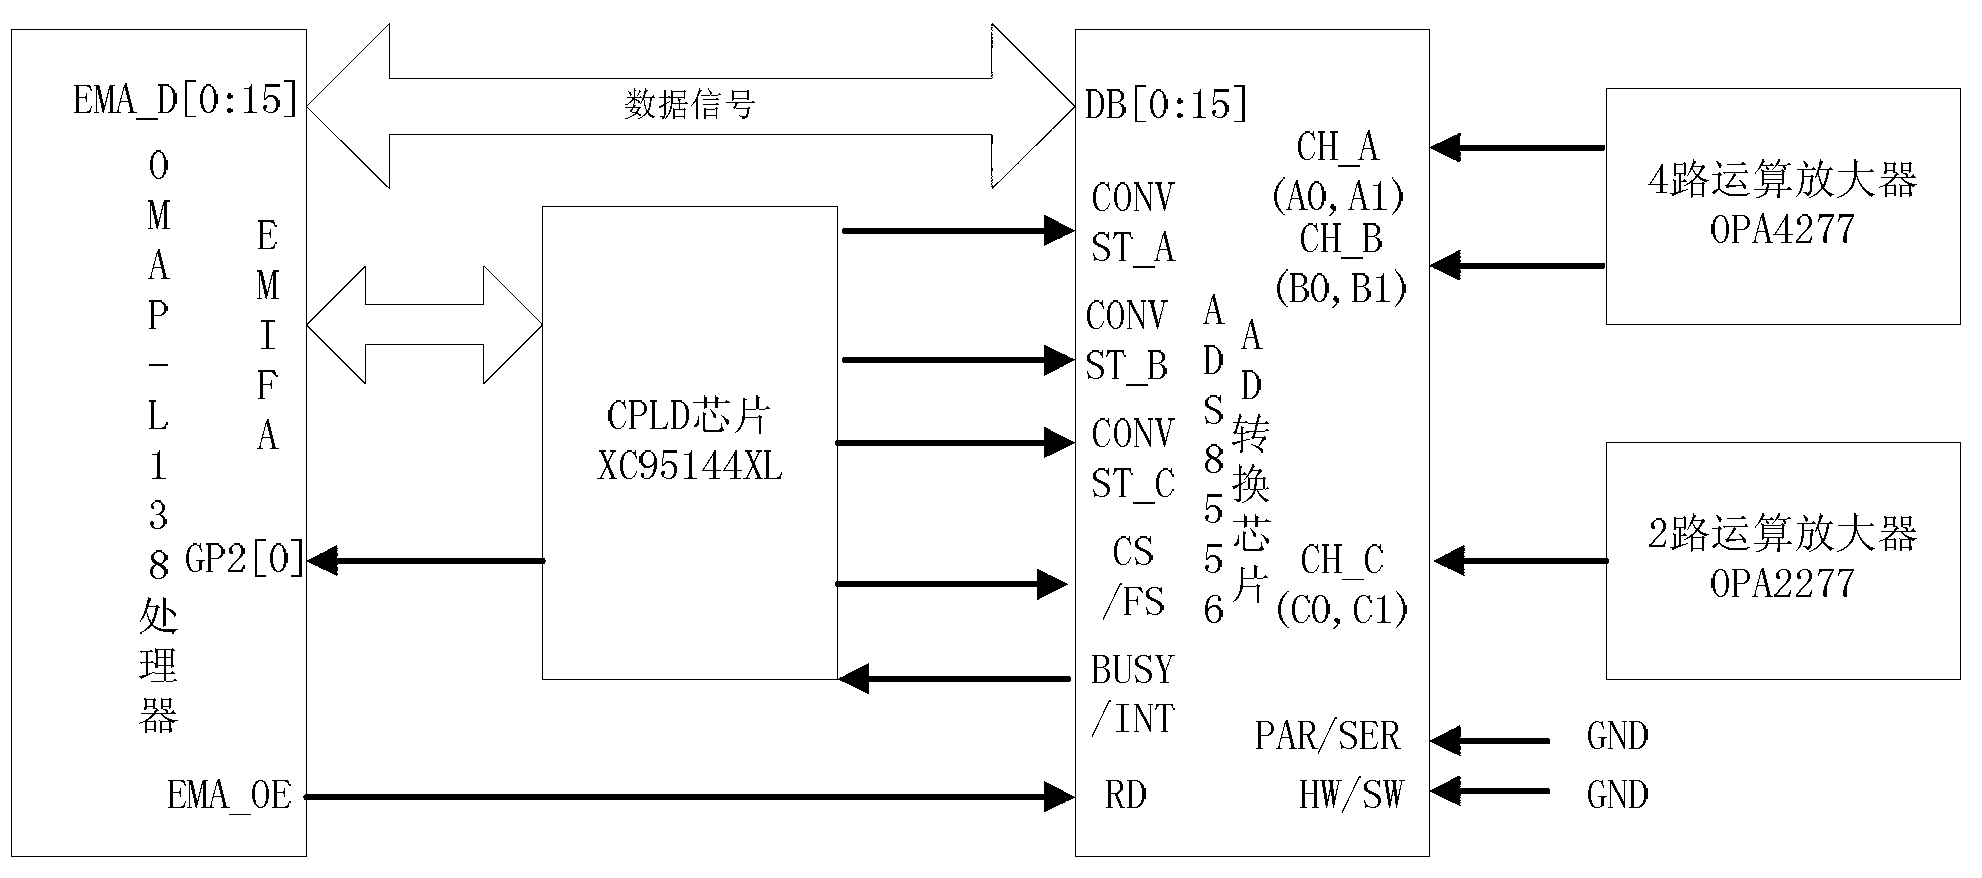 Acquisition and processing system of global system for mobile communications for railway (GSM-R) network interference signals